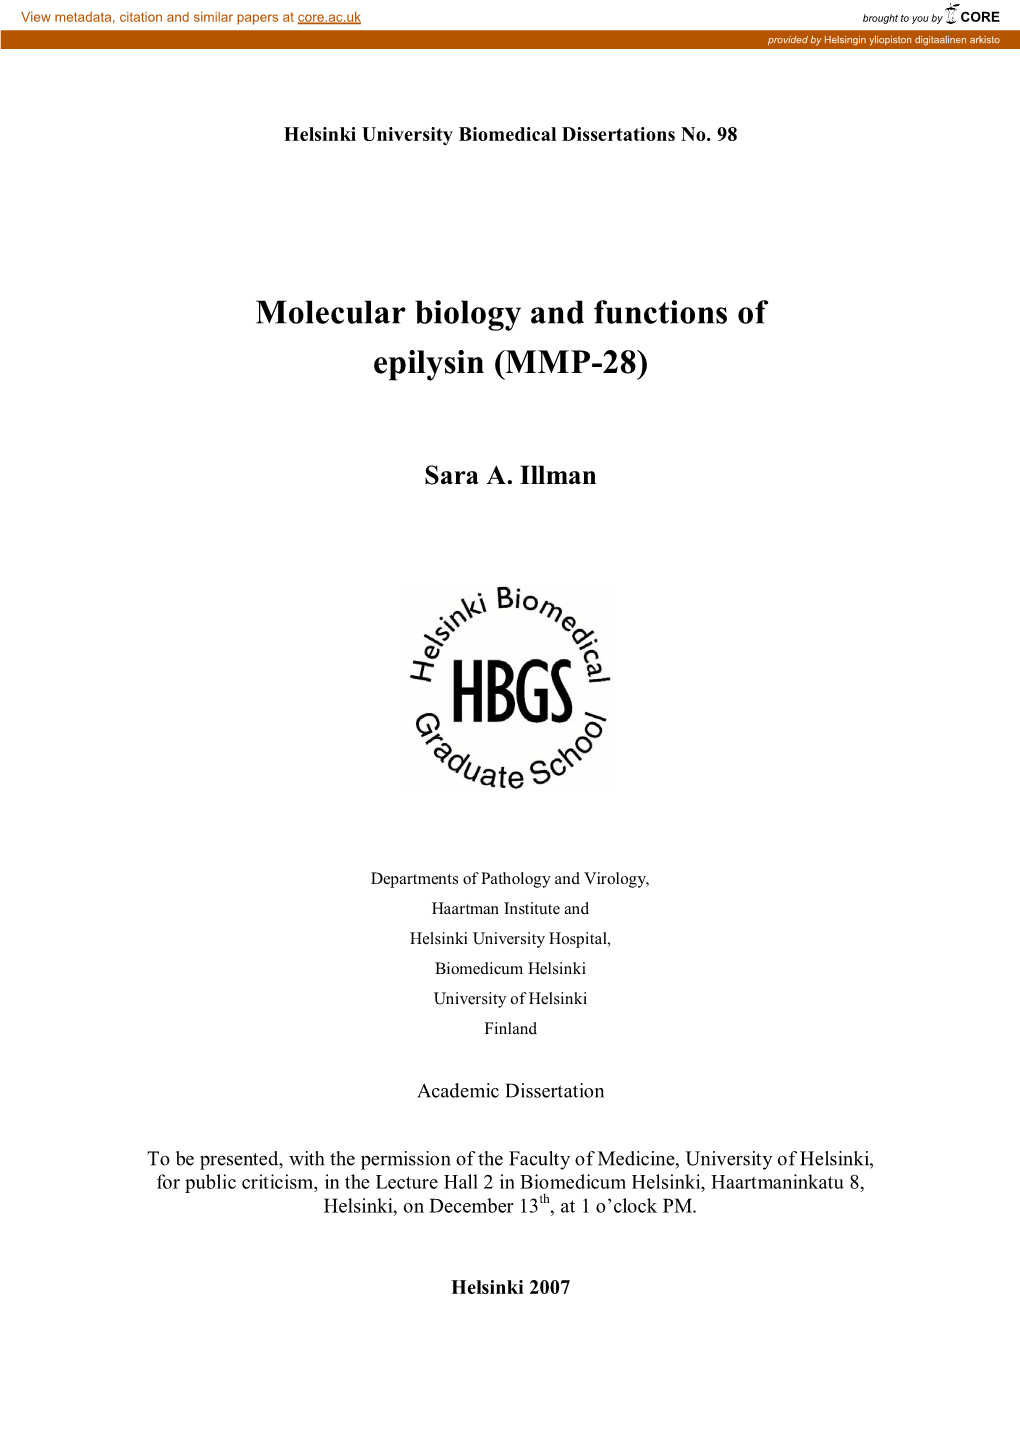 Molecular Biology and Functions of Epilysin (MMP-28)